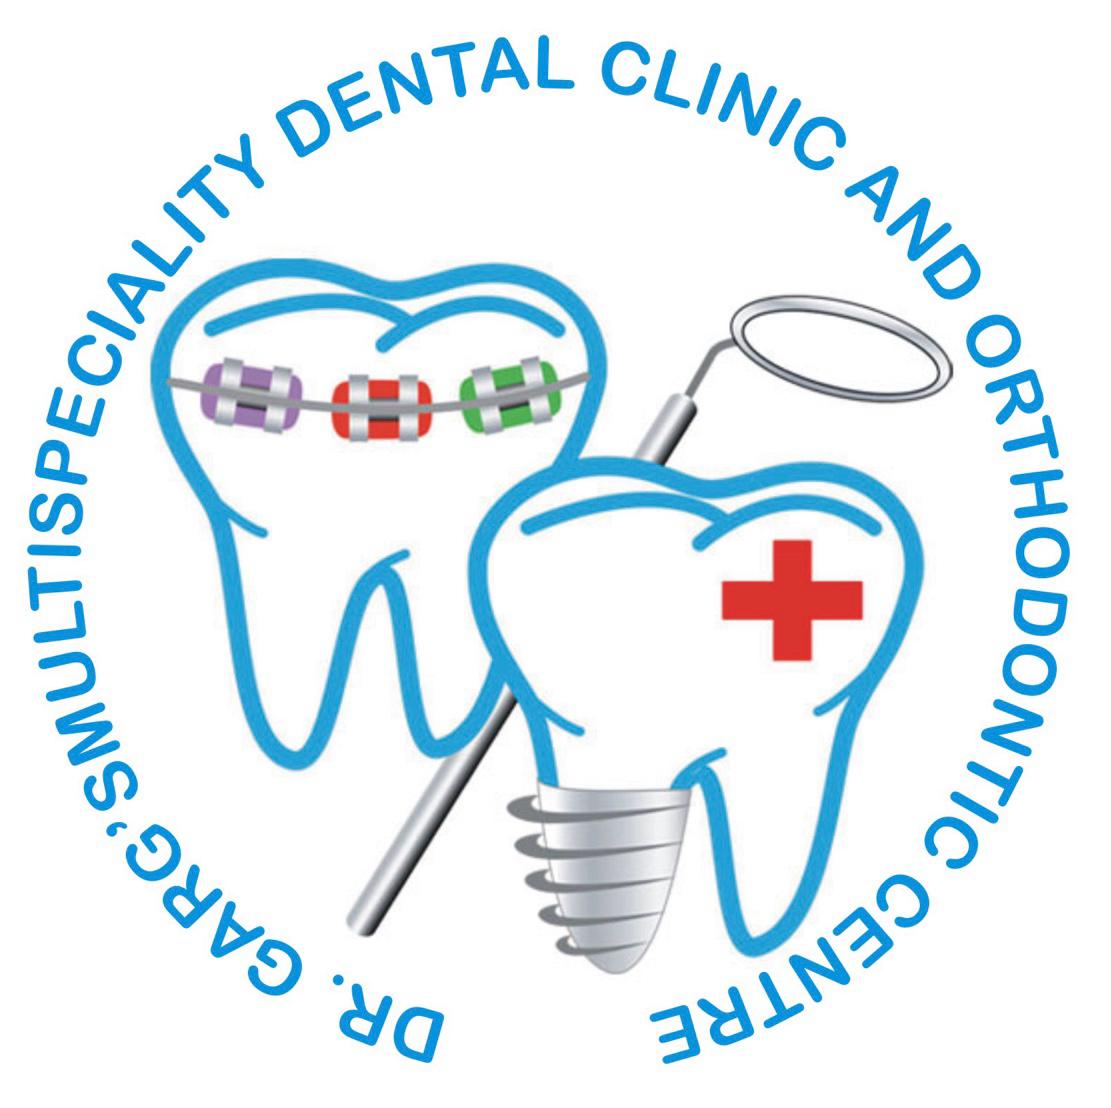 dr. gargs multispeciality dental clinic and orthodontic centre | dentists in meerut, uttar pradesh, india